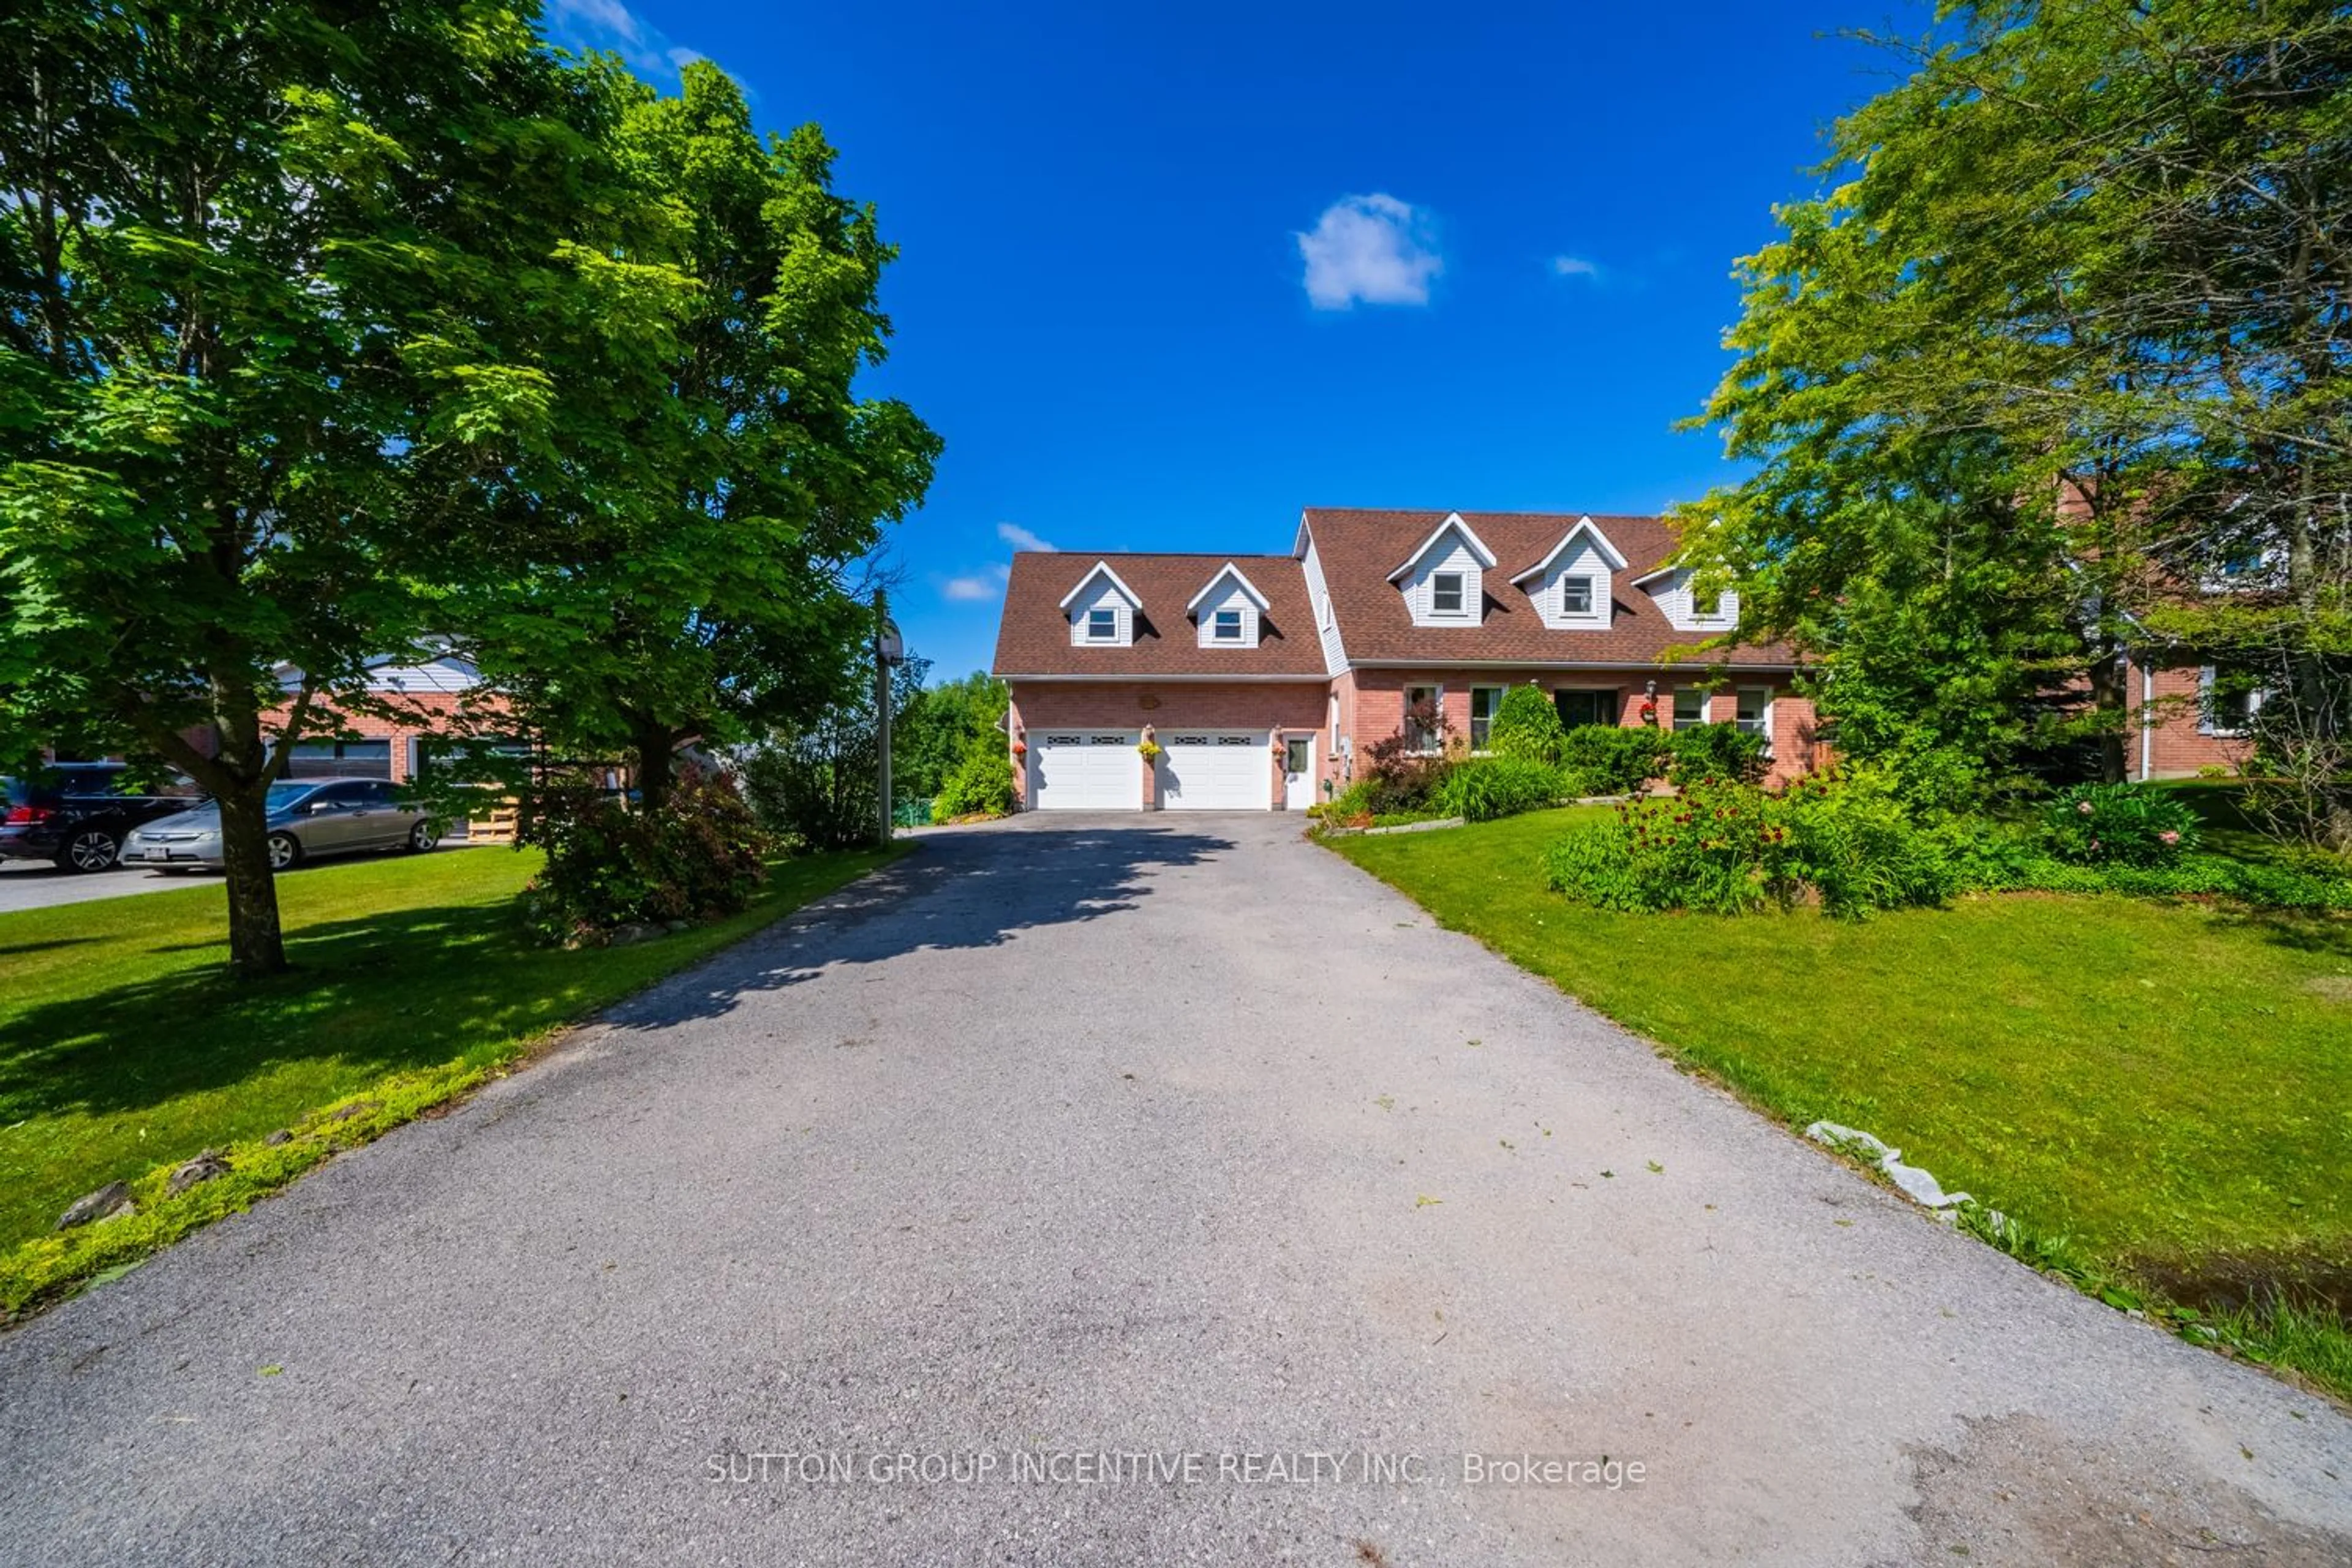 Frontside or backside of a home for 912 SLOAN CIRCLE Dr, Innisfil Ontario L0L 1K0